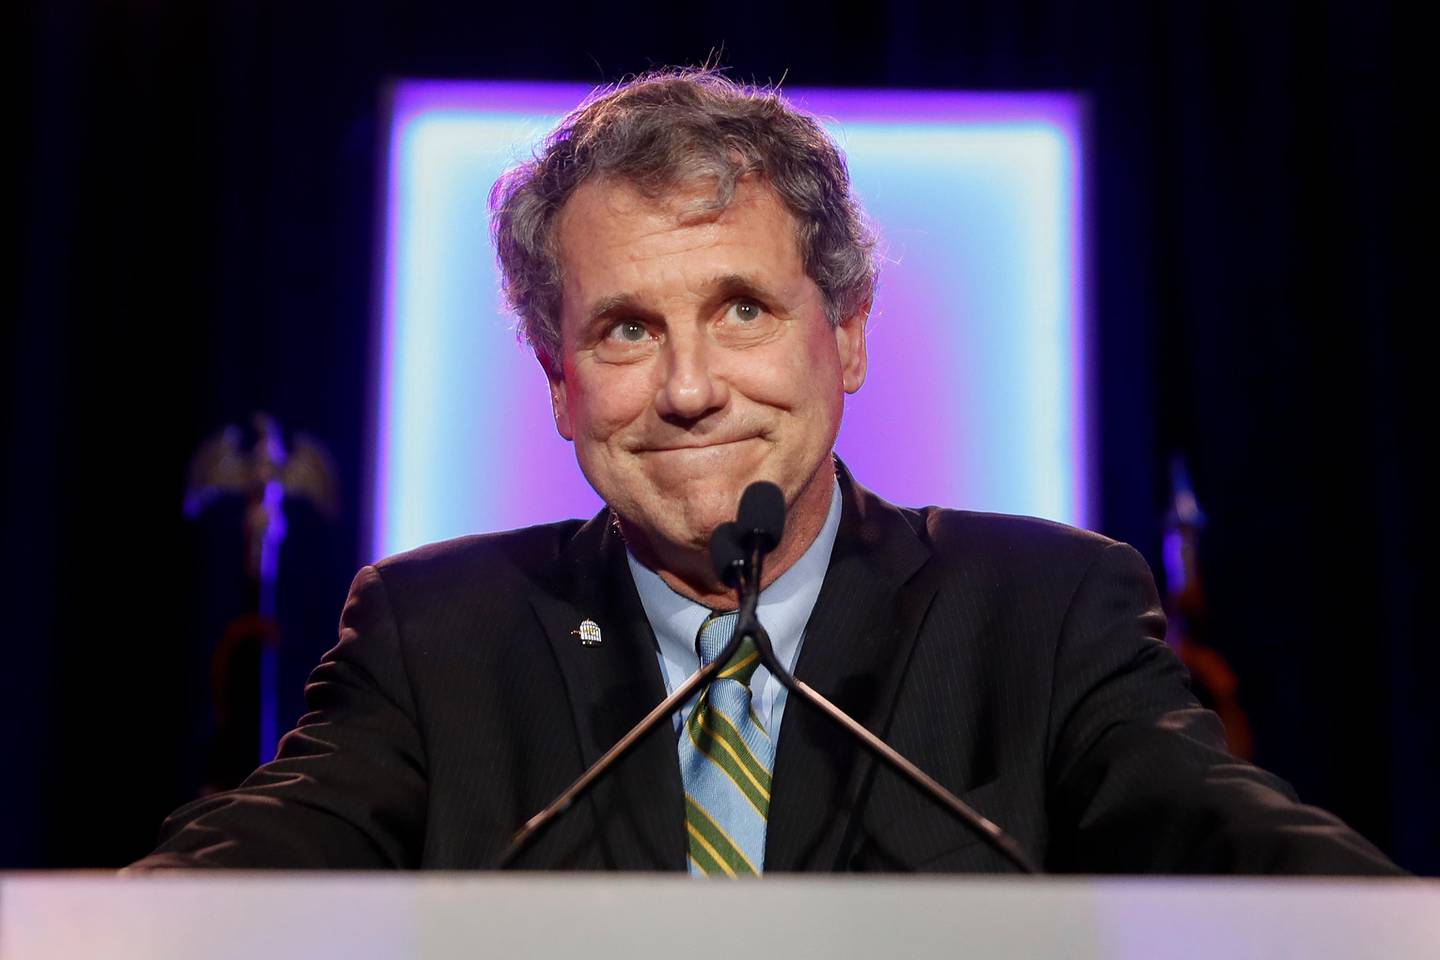 Sen. Sherrod Brown, D-Ohio, reacts as he speaks to the audience during the Ohio Democratic Party election night watch party, Tuesday, Nov. 6, 2018, in Columbus, Ohio. (AP Photo/John Minchillo)